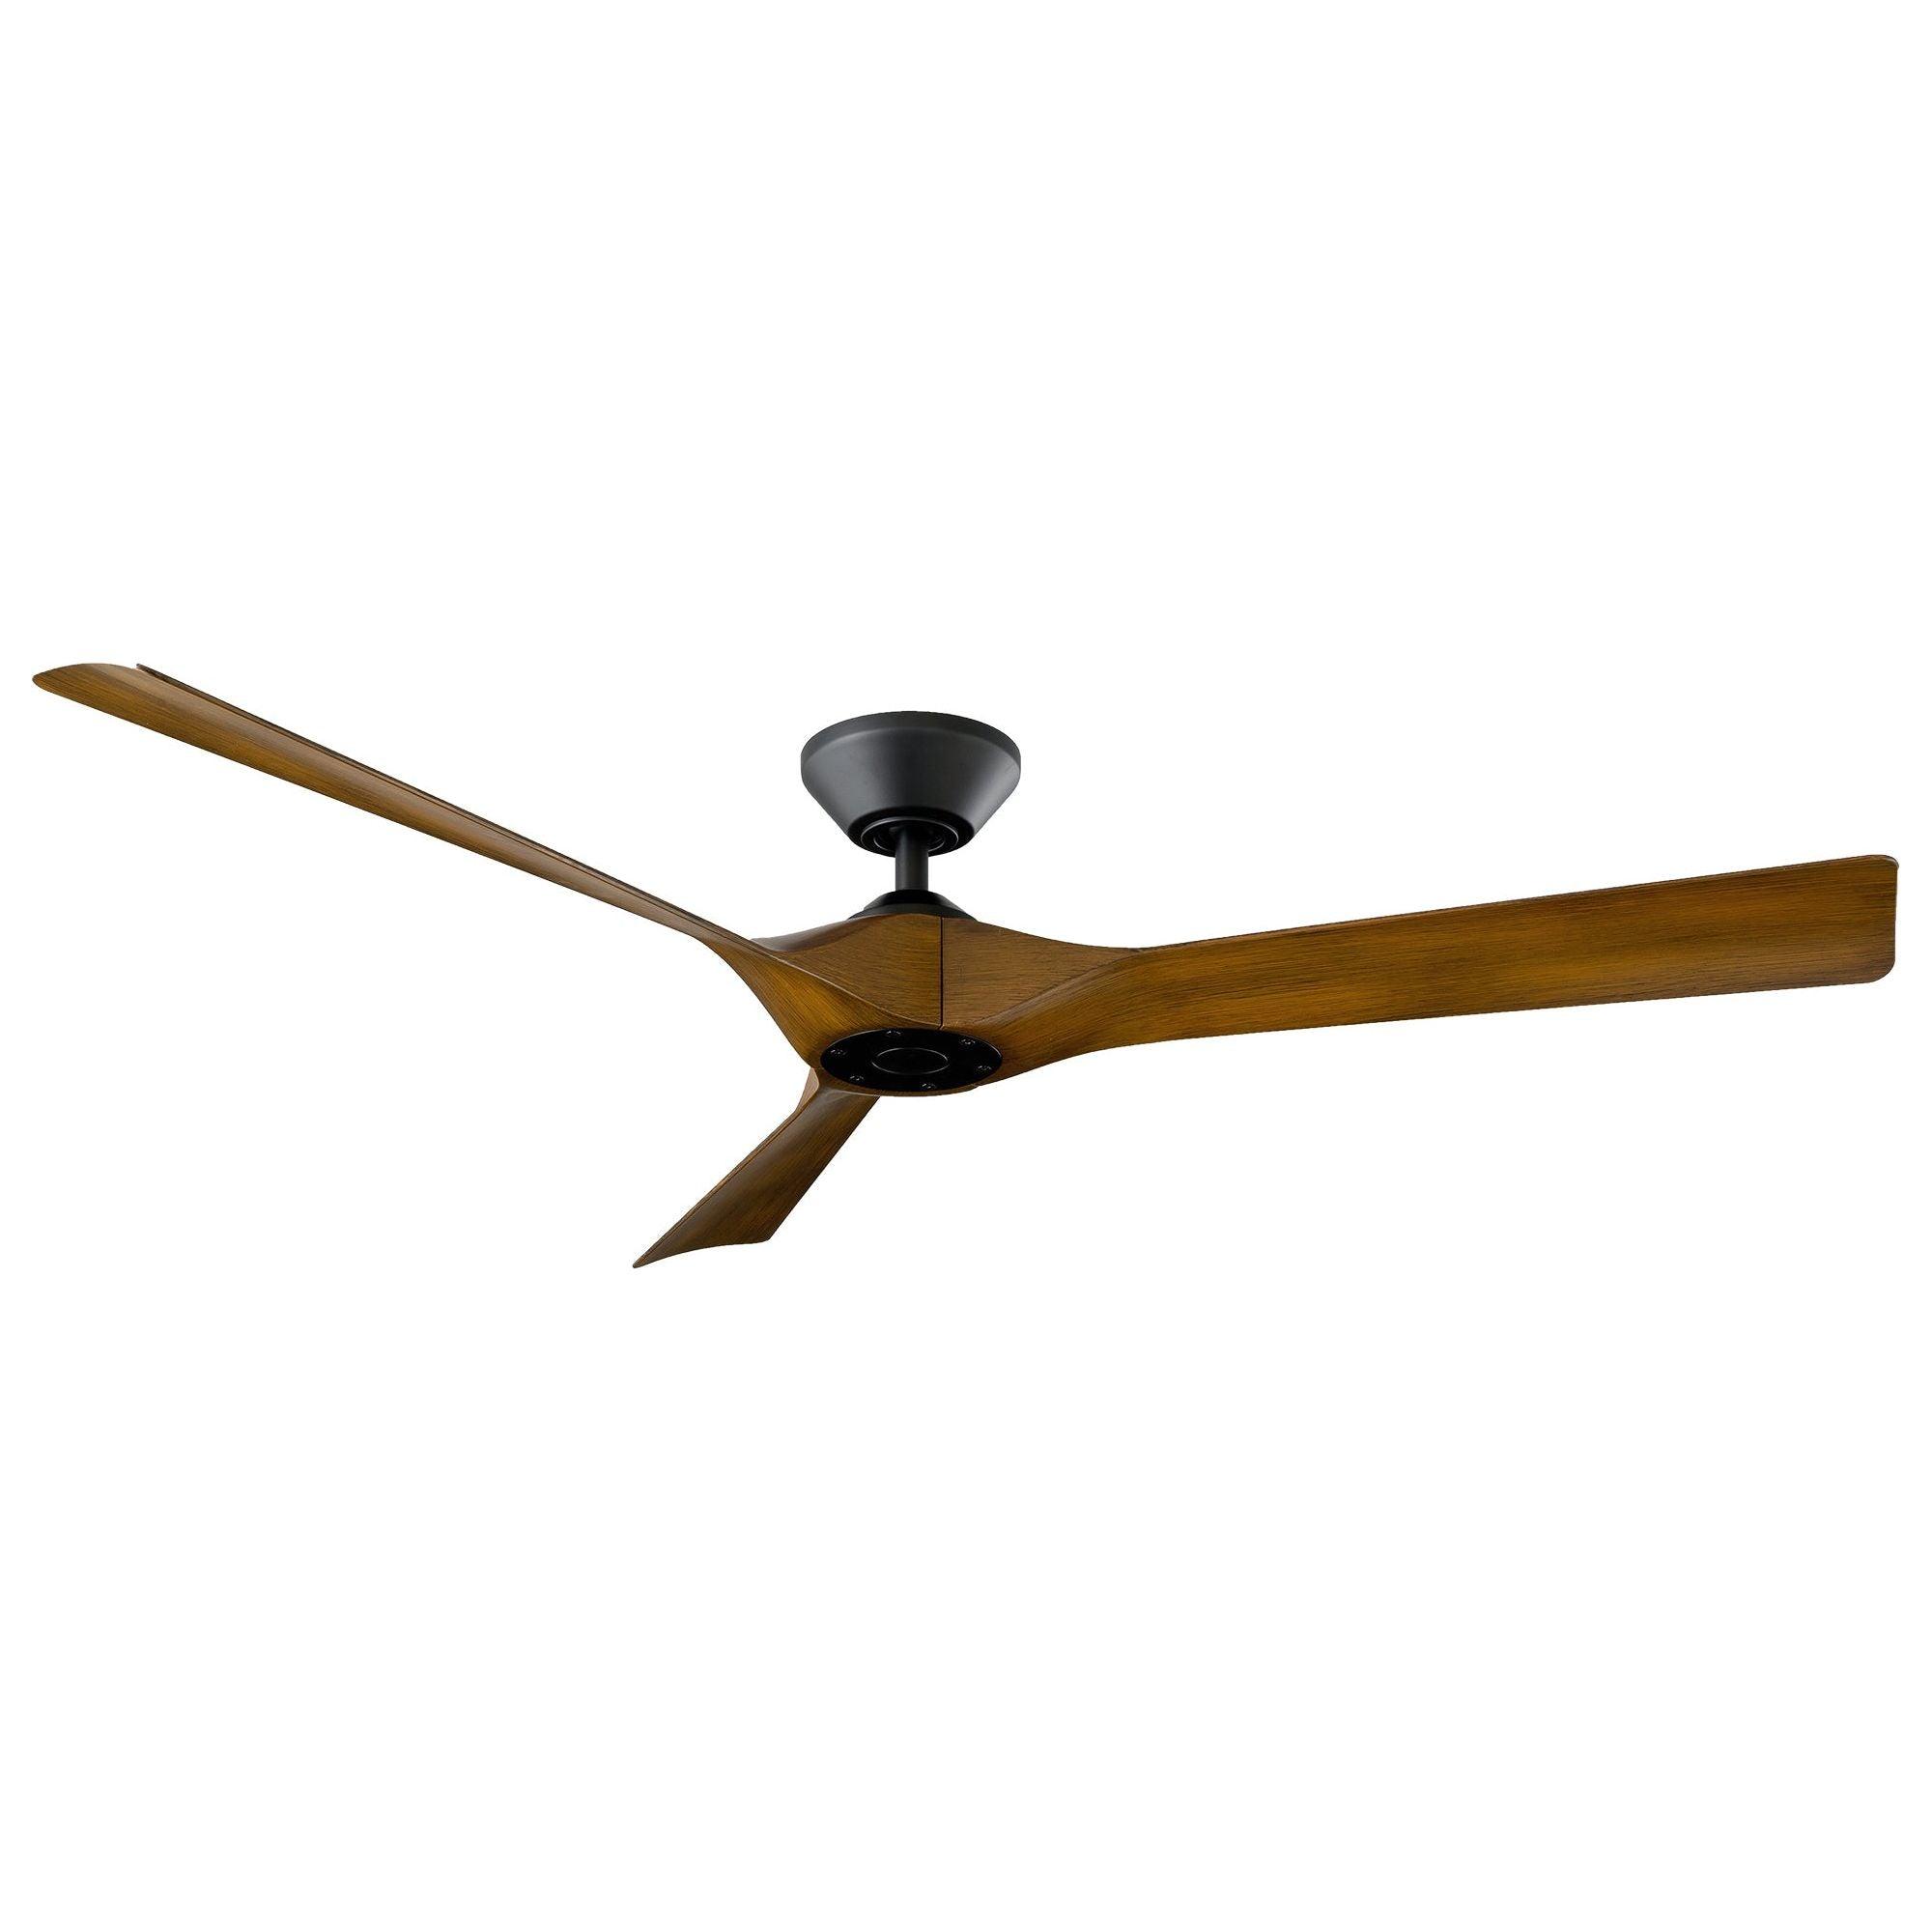 Modern Forms - Torque Indoor/Outdoor 3-Blade 58" Smart Ceiling Fan with Remote Control - Lights Canada